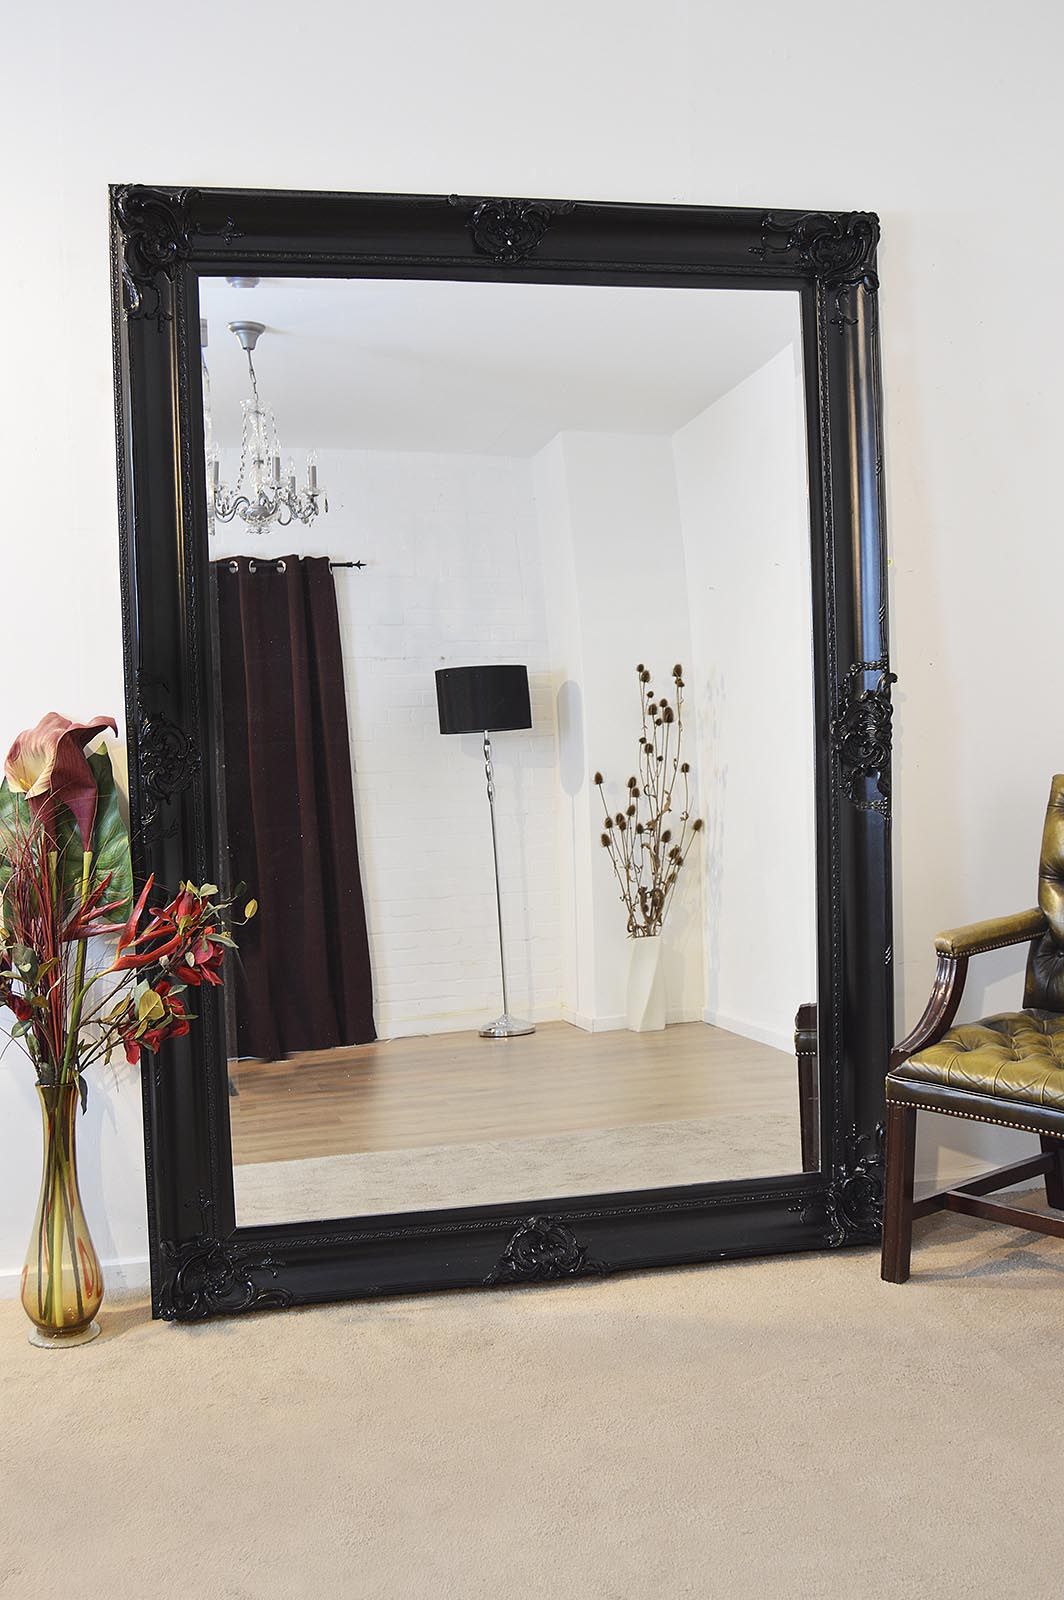 Decorative Ornate Wall Mirror 7ft X 5ft, Extra Large Black Mirror For Wall